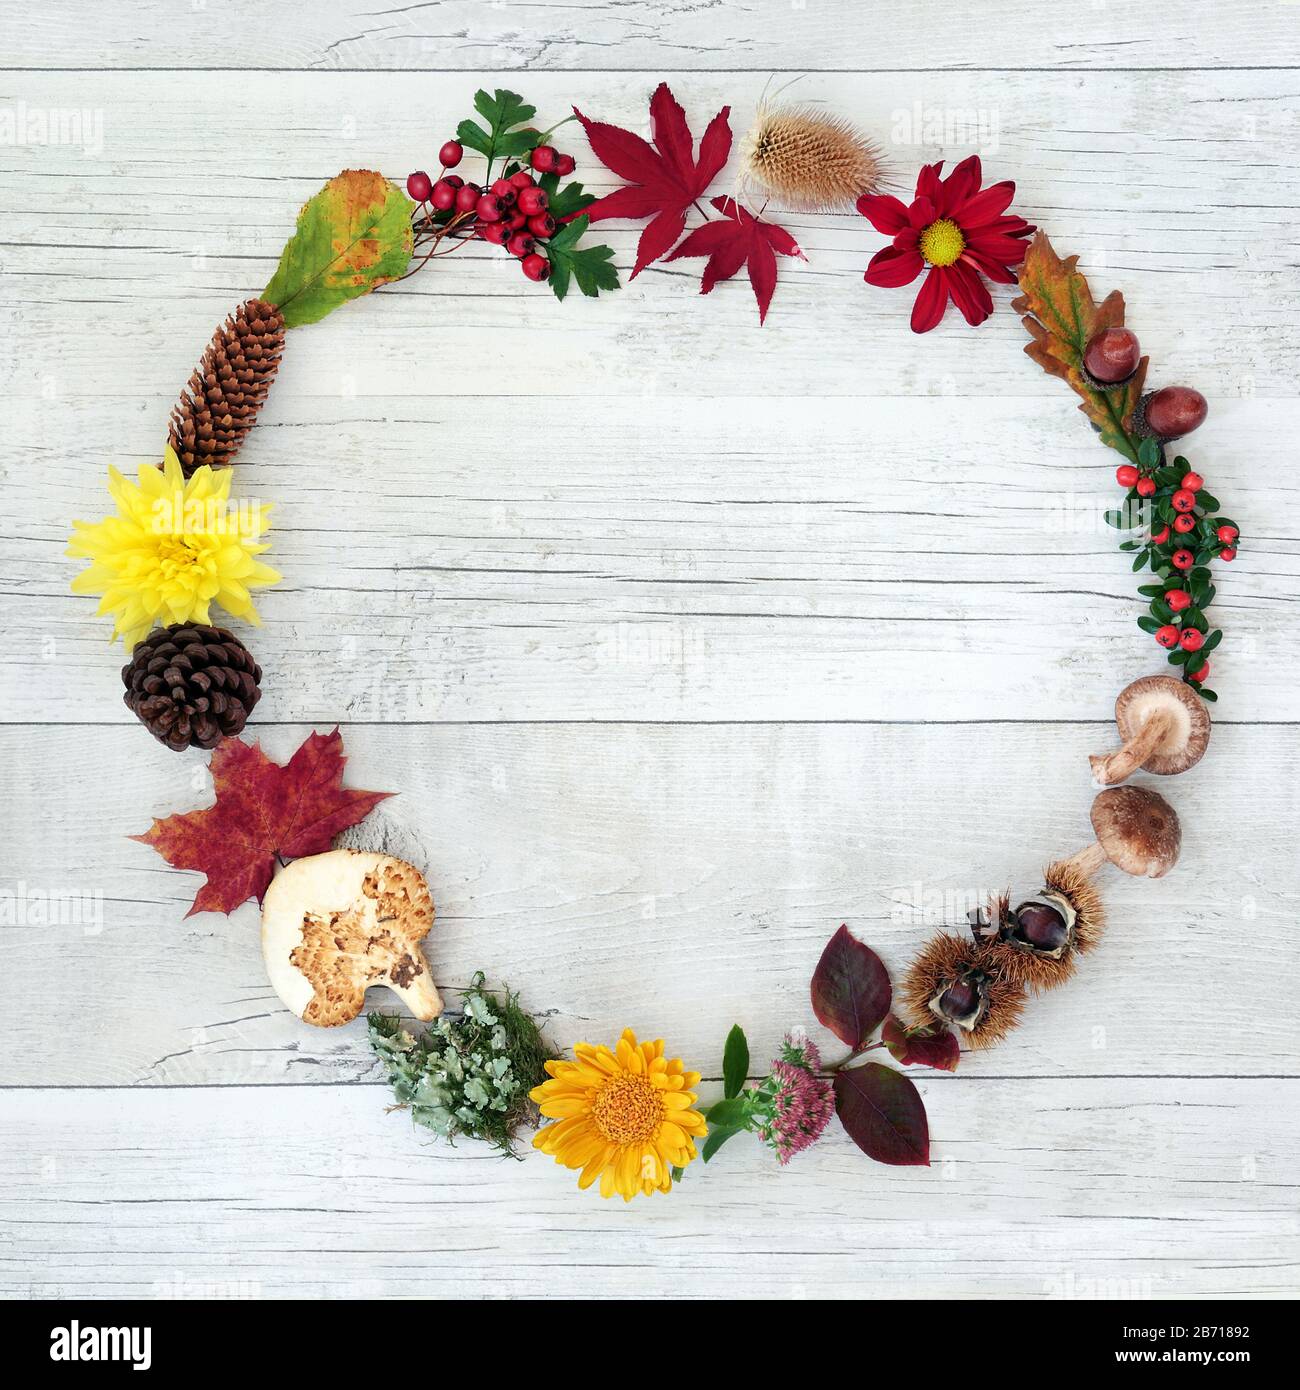 Autumn wreath harvest composition with a variety of natural flora and food on rustic wood background. Stock Photo